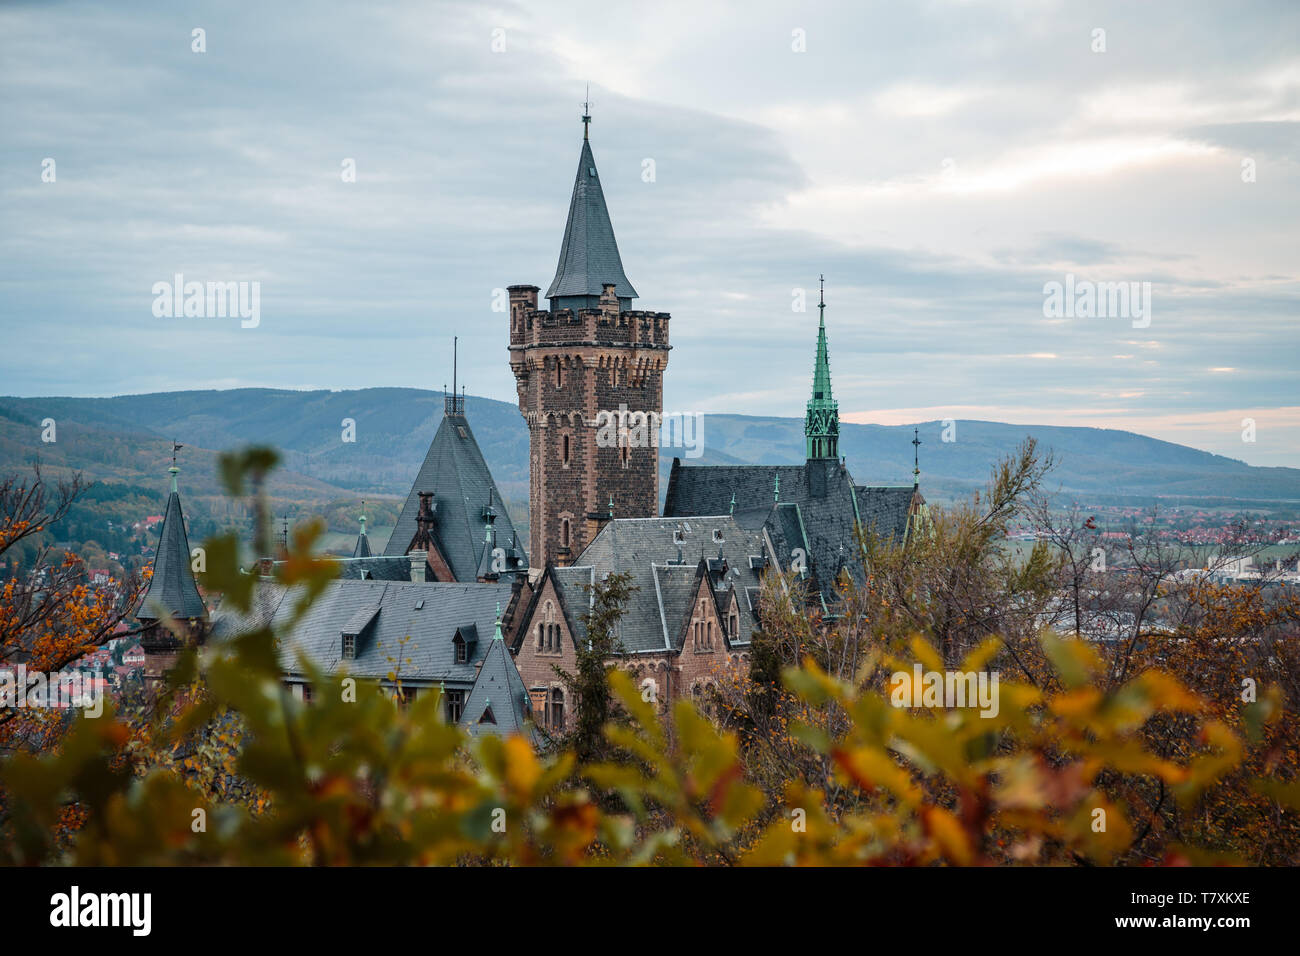 The historic castle in Wernigerode. Added to the Season autumn evening mood. Stock Photo